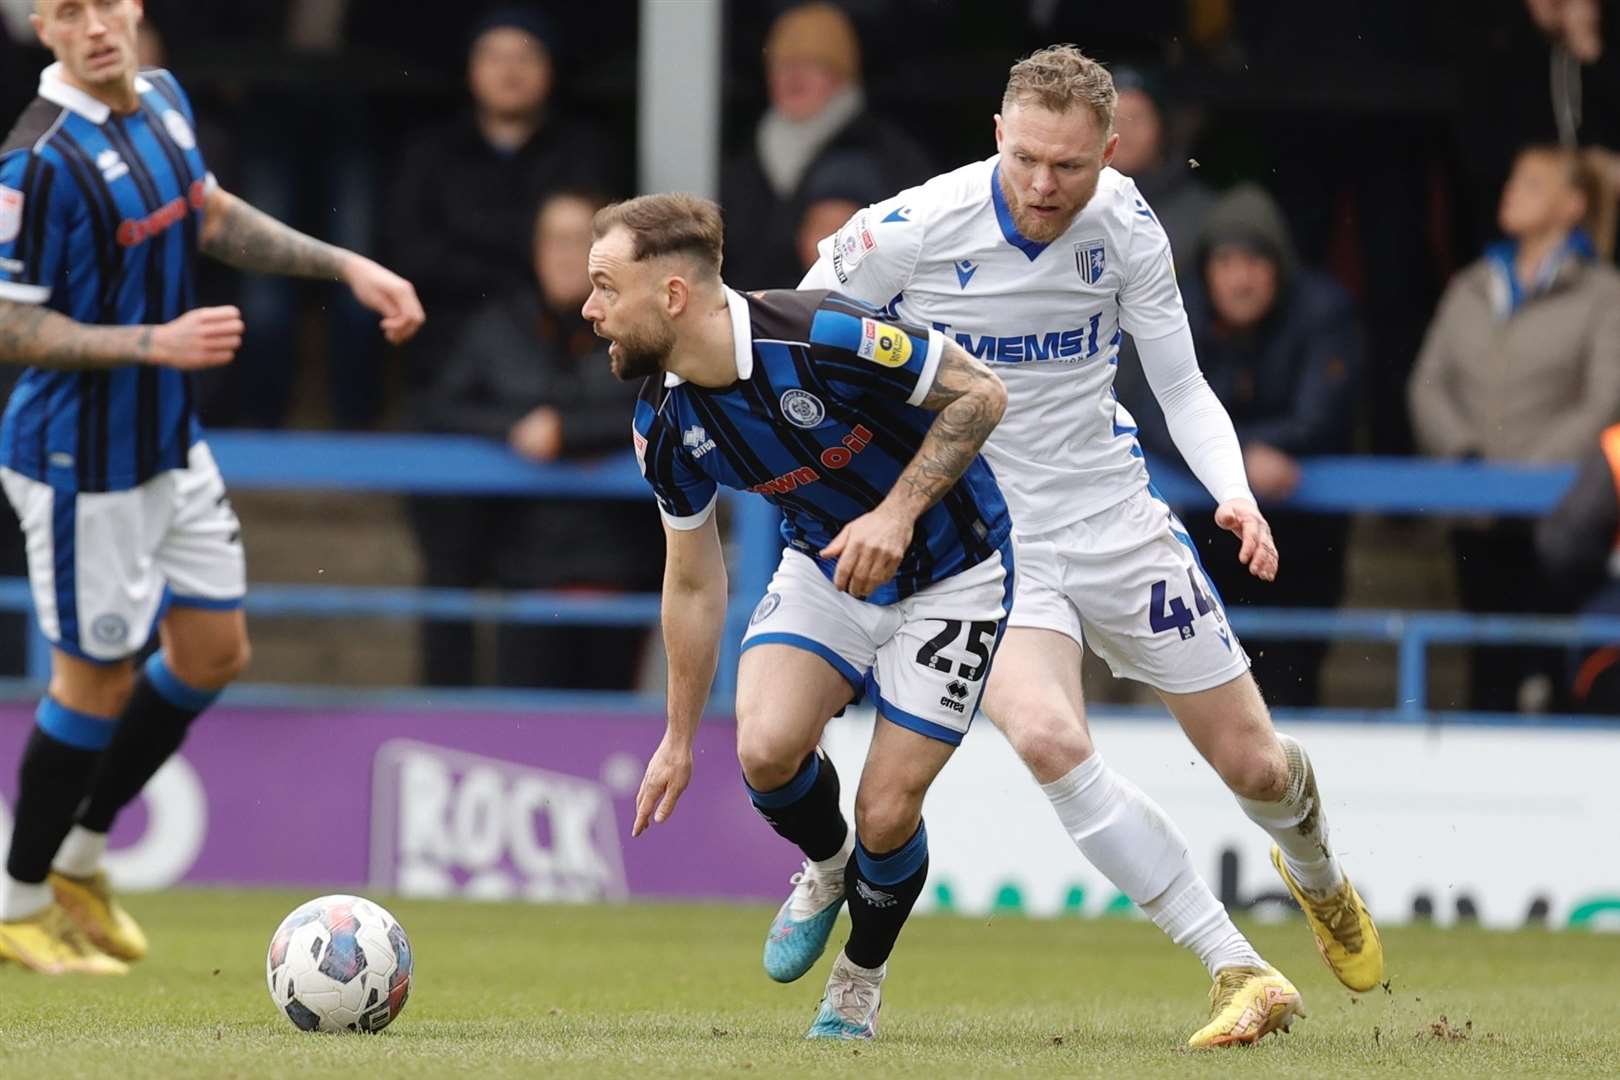 Aiden O'Brien made his first start for Gillingham as manager Neil Harris rotated his squad